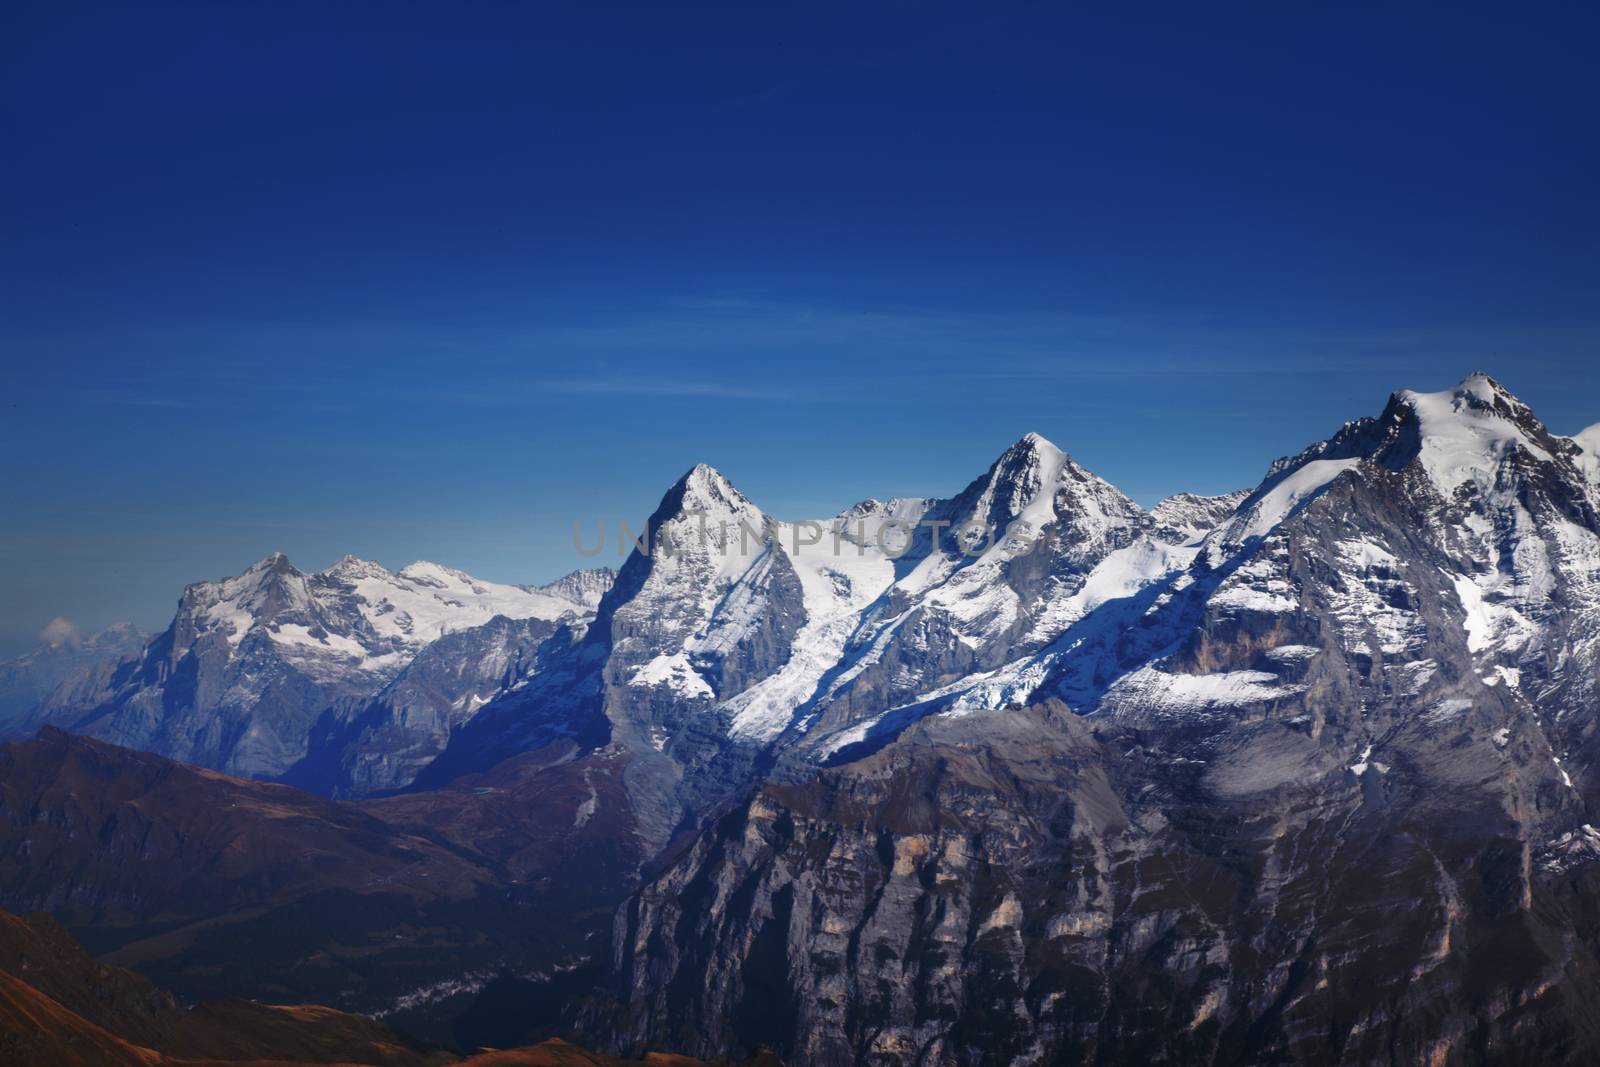 Eiger, Moench and Jungfrau - three famous Swiss mountains. Some of the tallest mountains in Europe